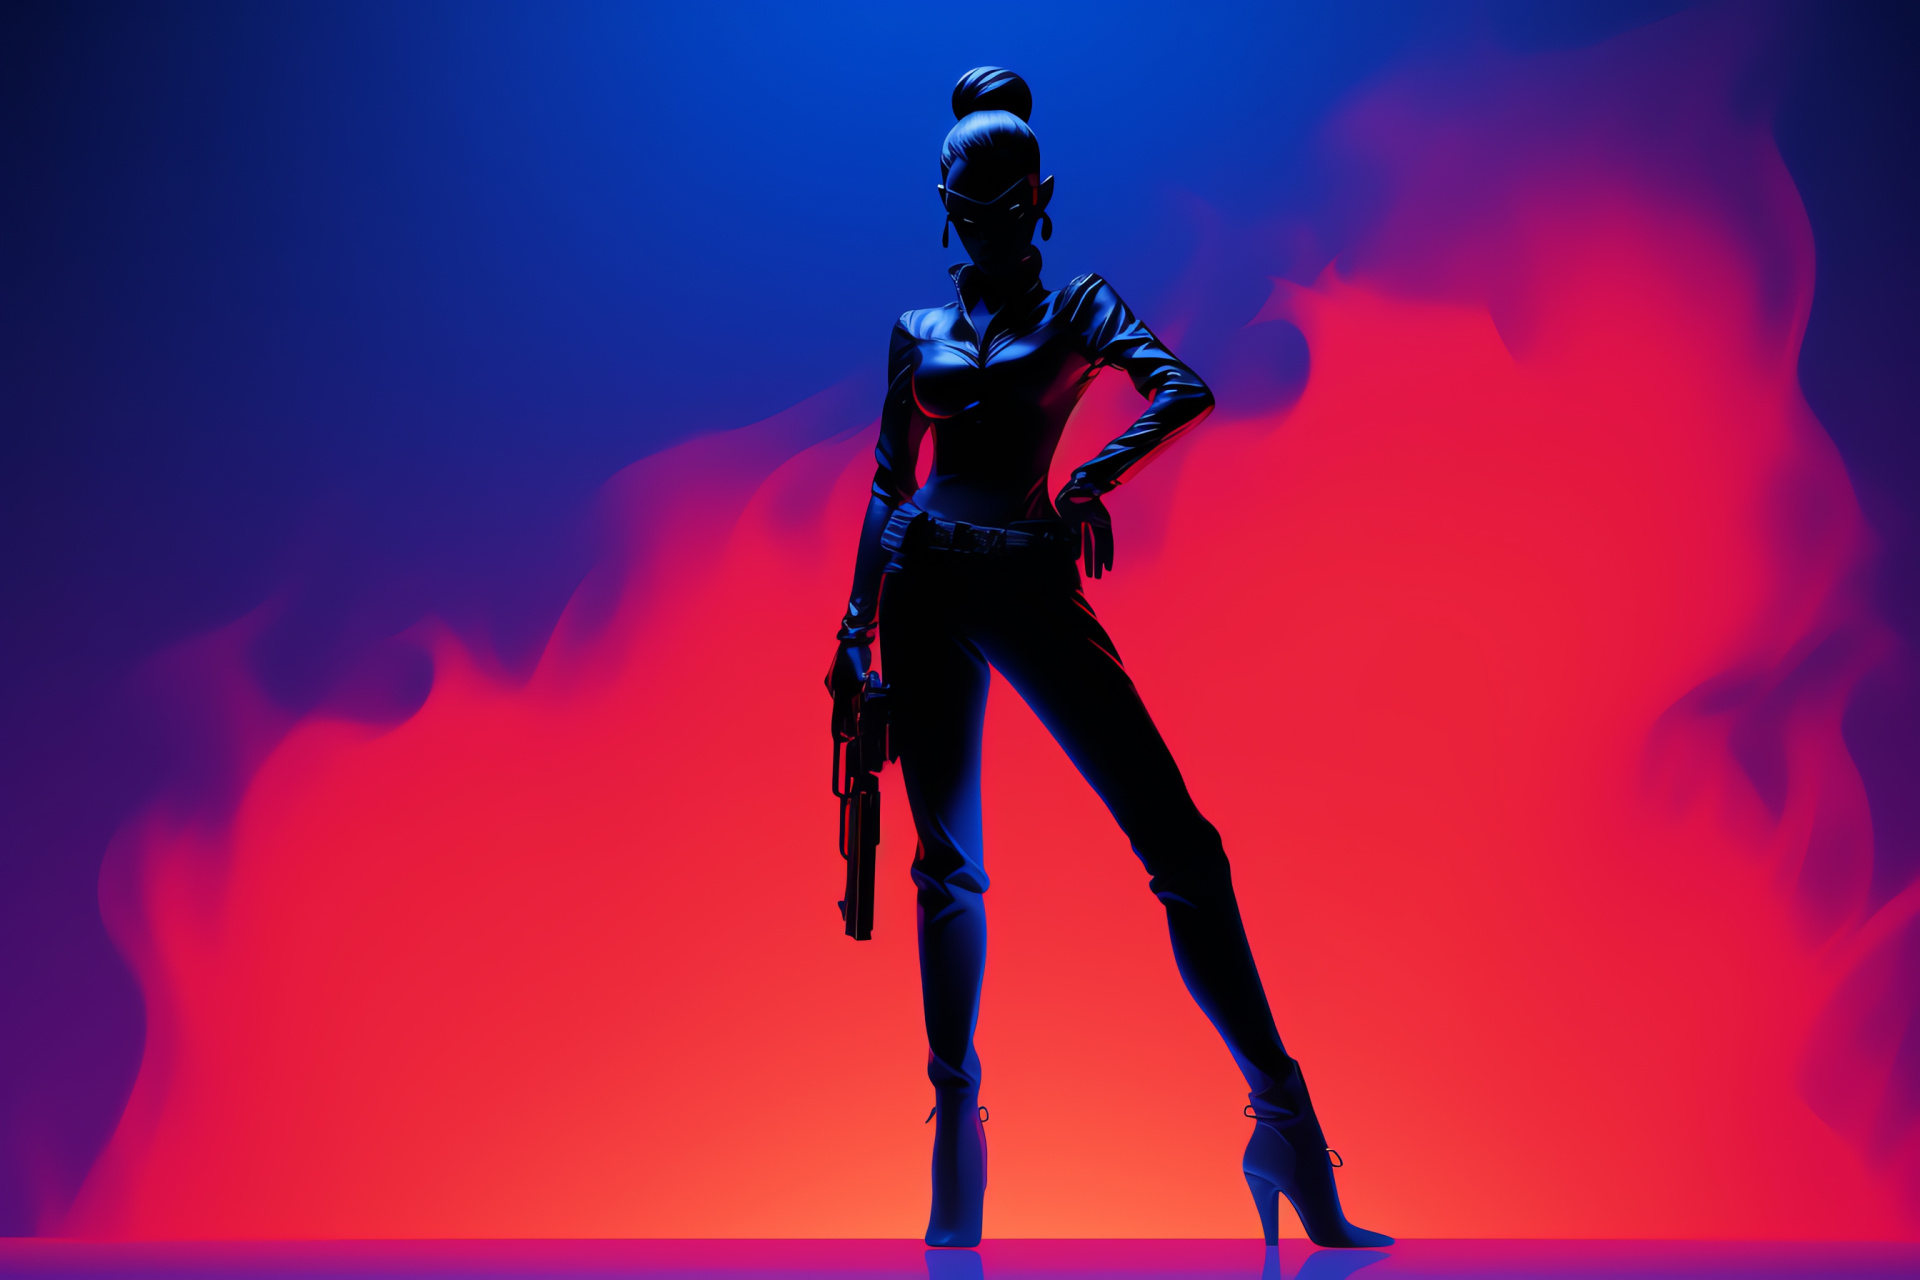 Deadly assassin Widowmaker, Overwatch's rouge agent, Crimson visual sensors, Stealthy video game character, Sniper precision, HD Desktop Image